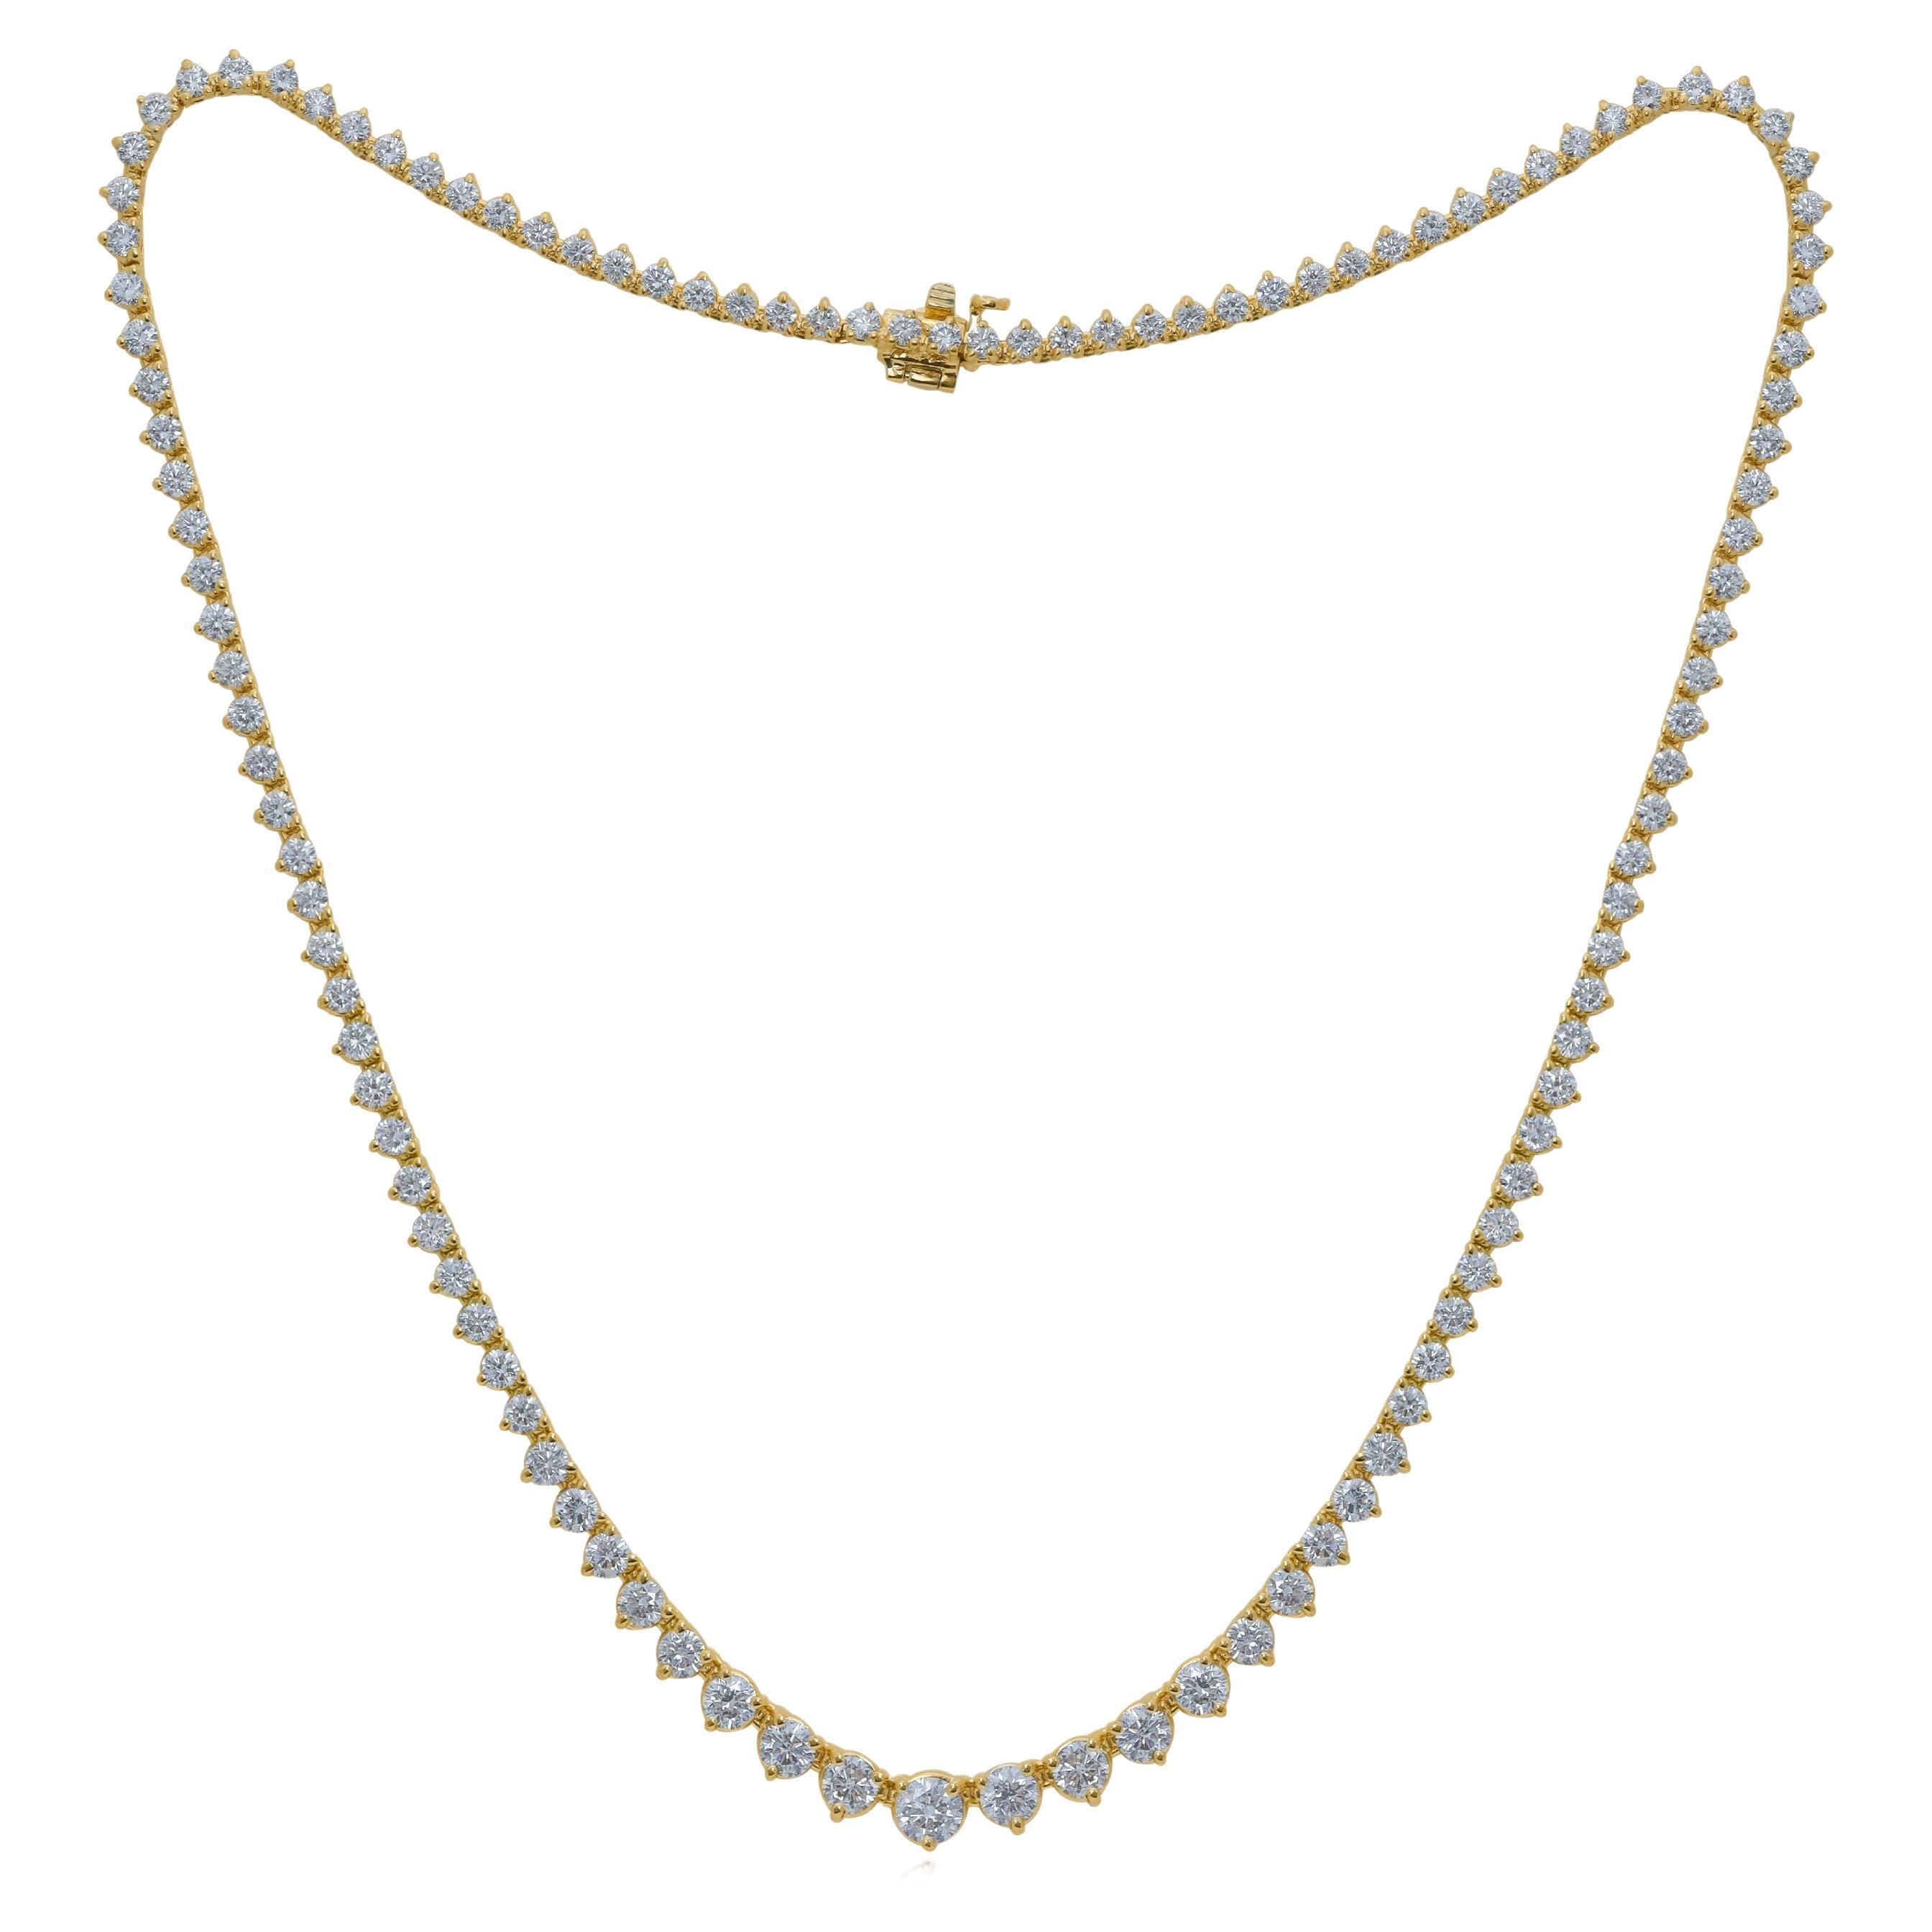 Diana M. 18kt Yellow Gold Graduated Reviera Tennis Necklace Featuring 11.15 cts  For Sale